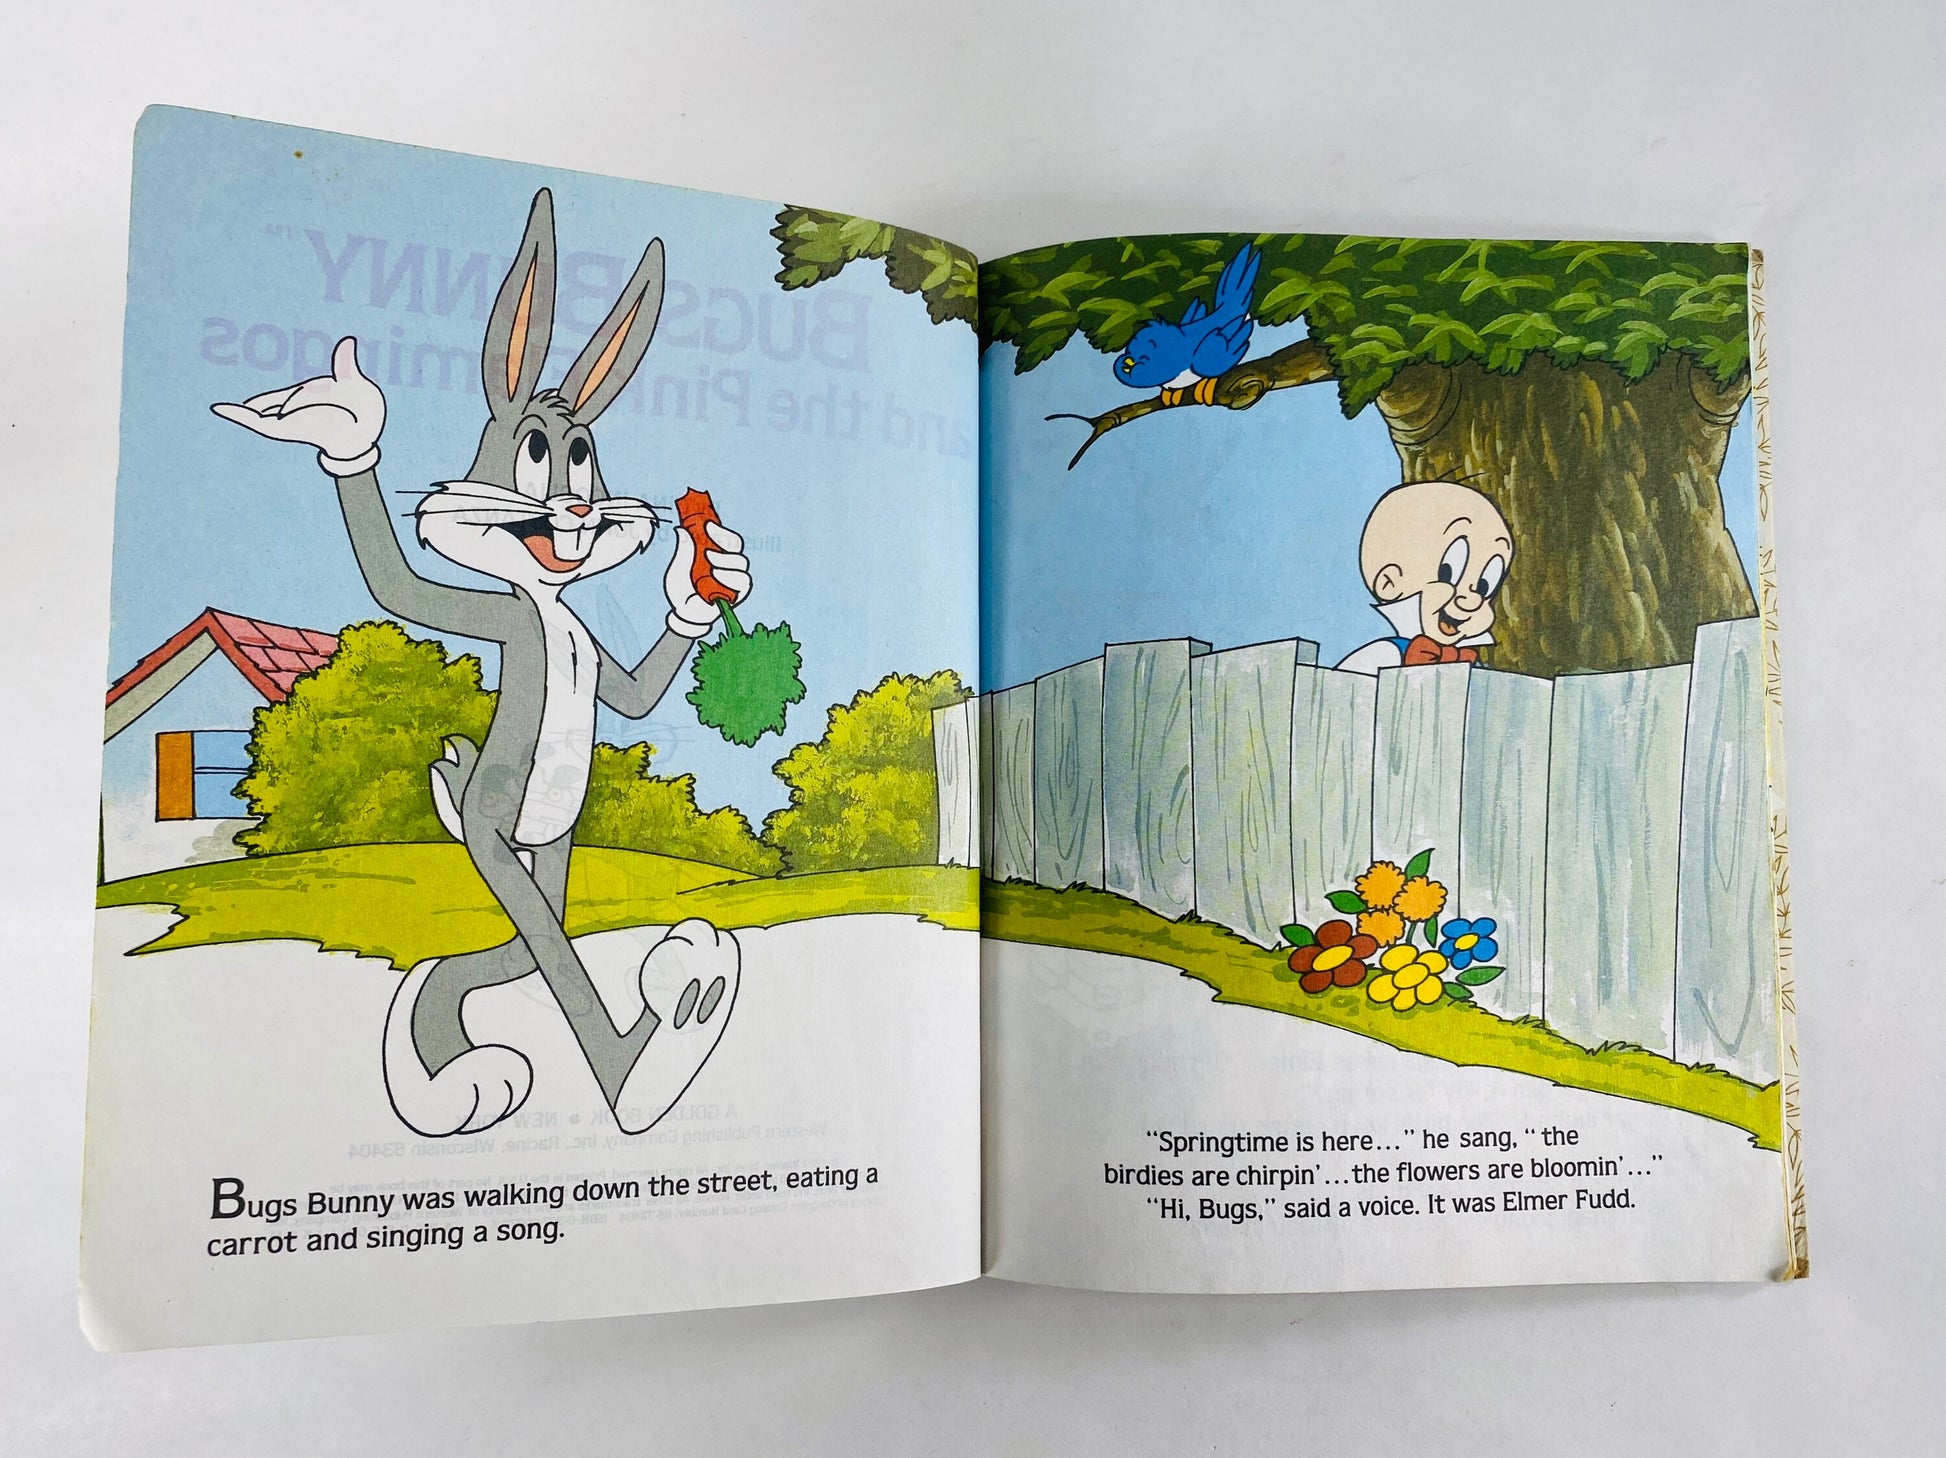 1987 Bugs Bunny and the Pink Flamingos Vintage Little Golden Book with Elmer Fudd, Porky Pig, Daffy Duck, Petunia Pig.